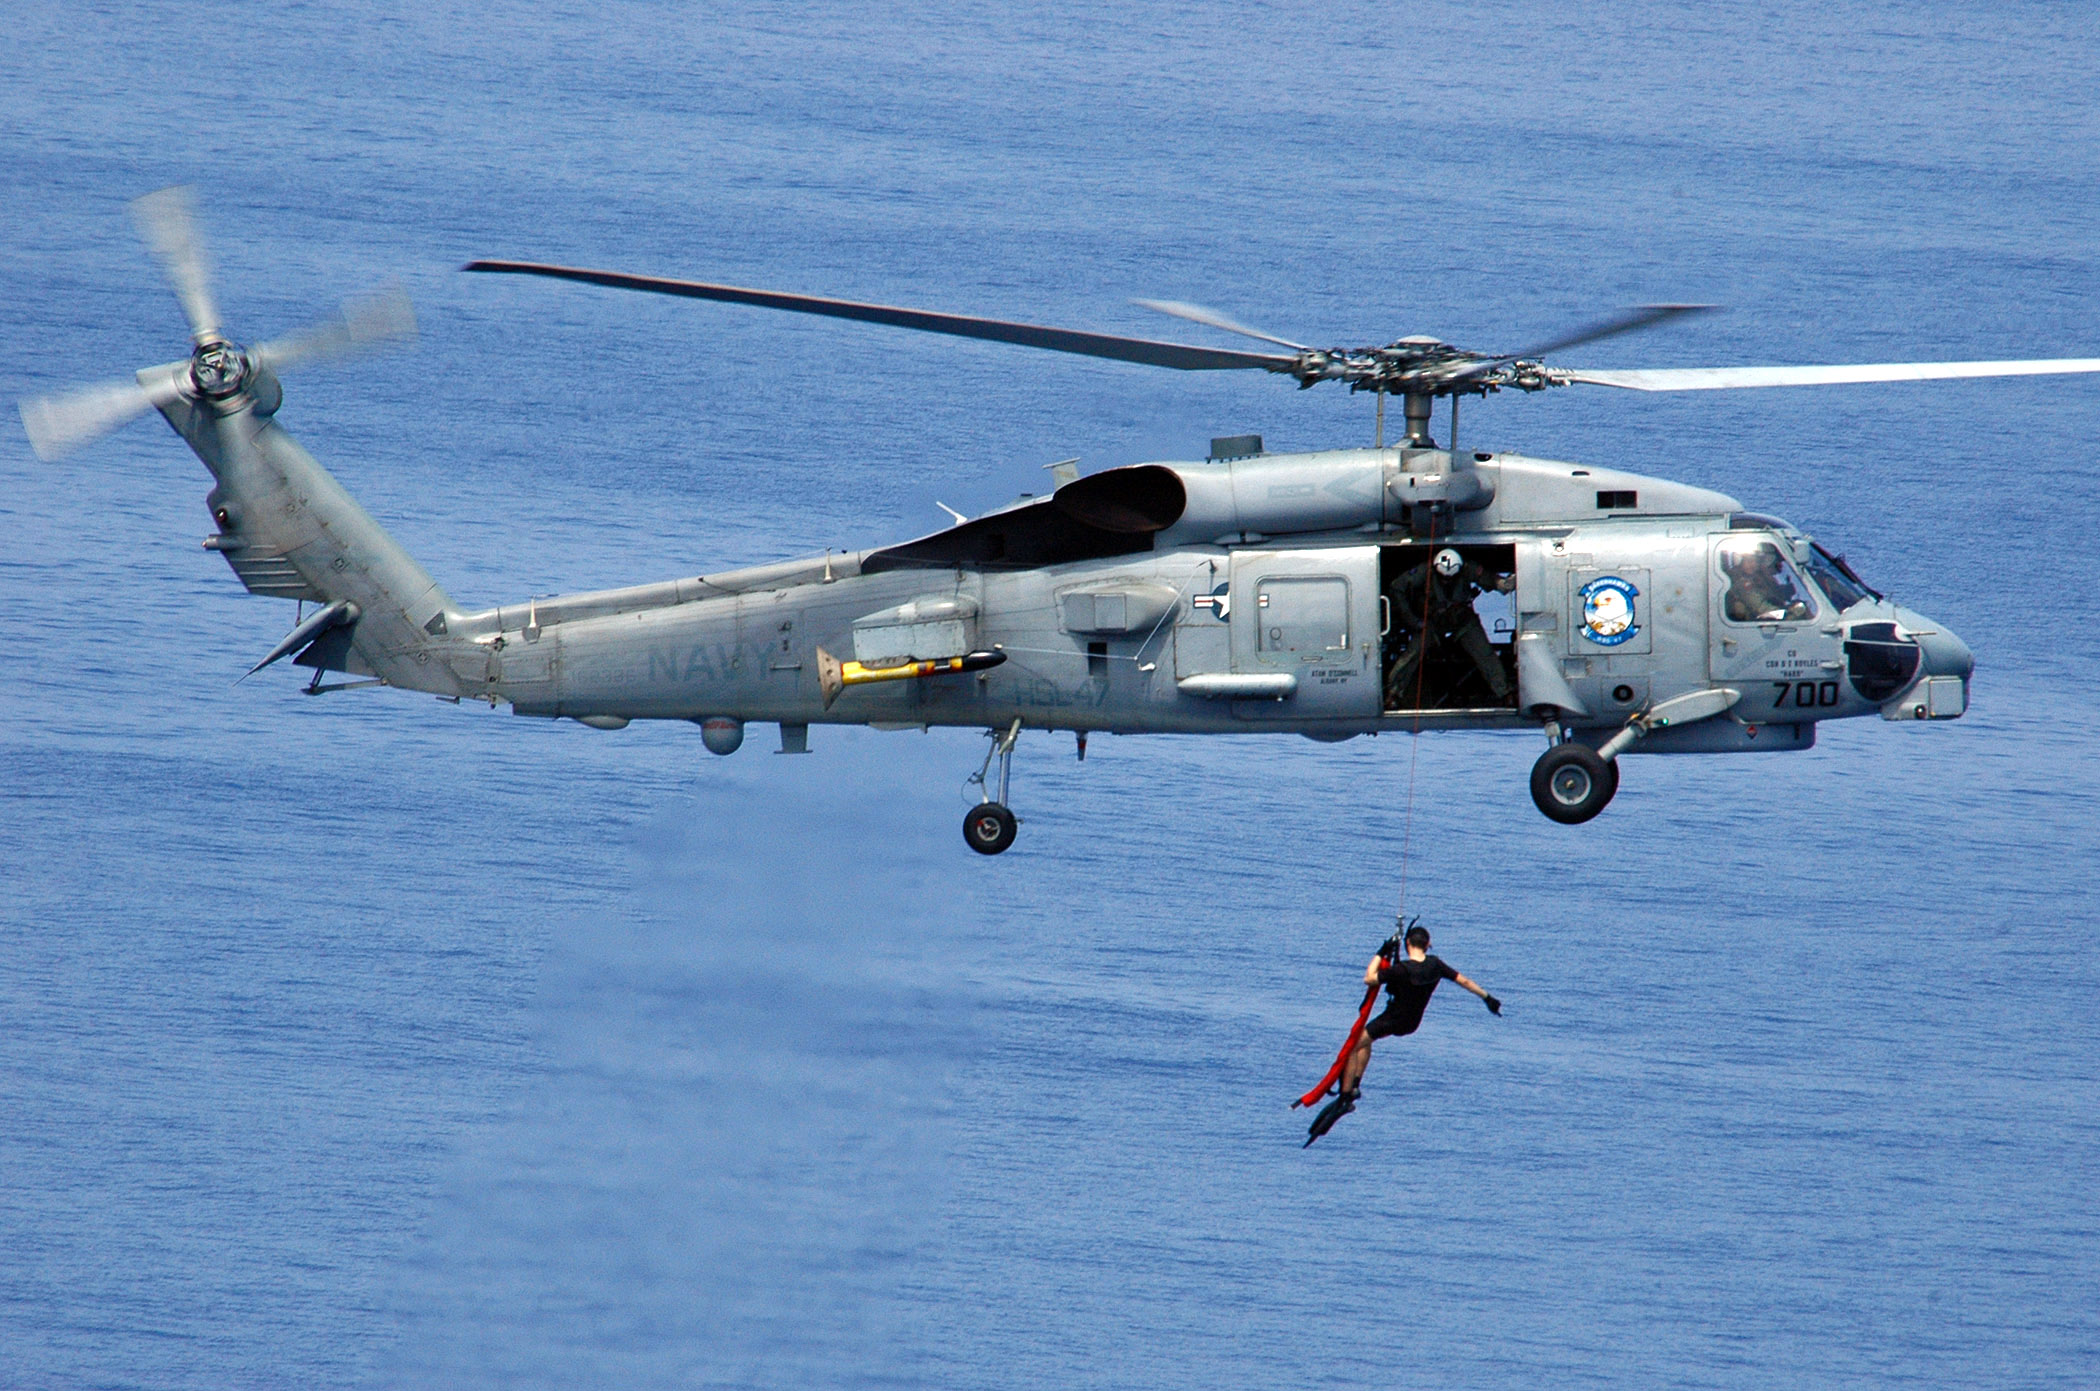 US_Navy_060417-N-9079D-095_An_SH-60B_Seahawk_helicopter_assigned_to_Helicopter_Anti-Submarine_Squadron_Light_Four_Seven_%28HSL-47%29_deploys_a_search_and_rescue_swimmer.jpg